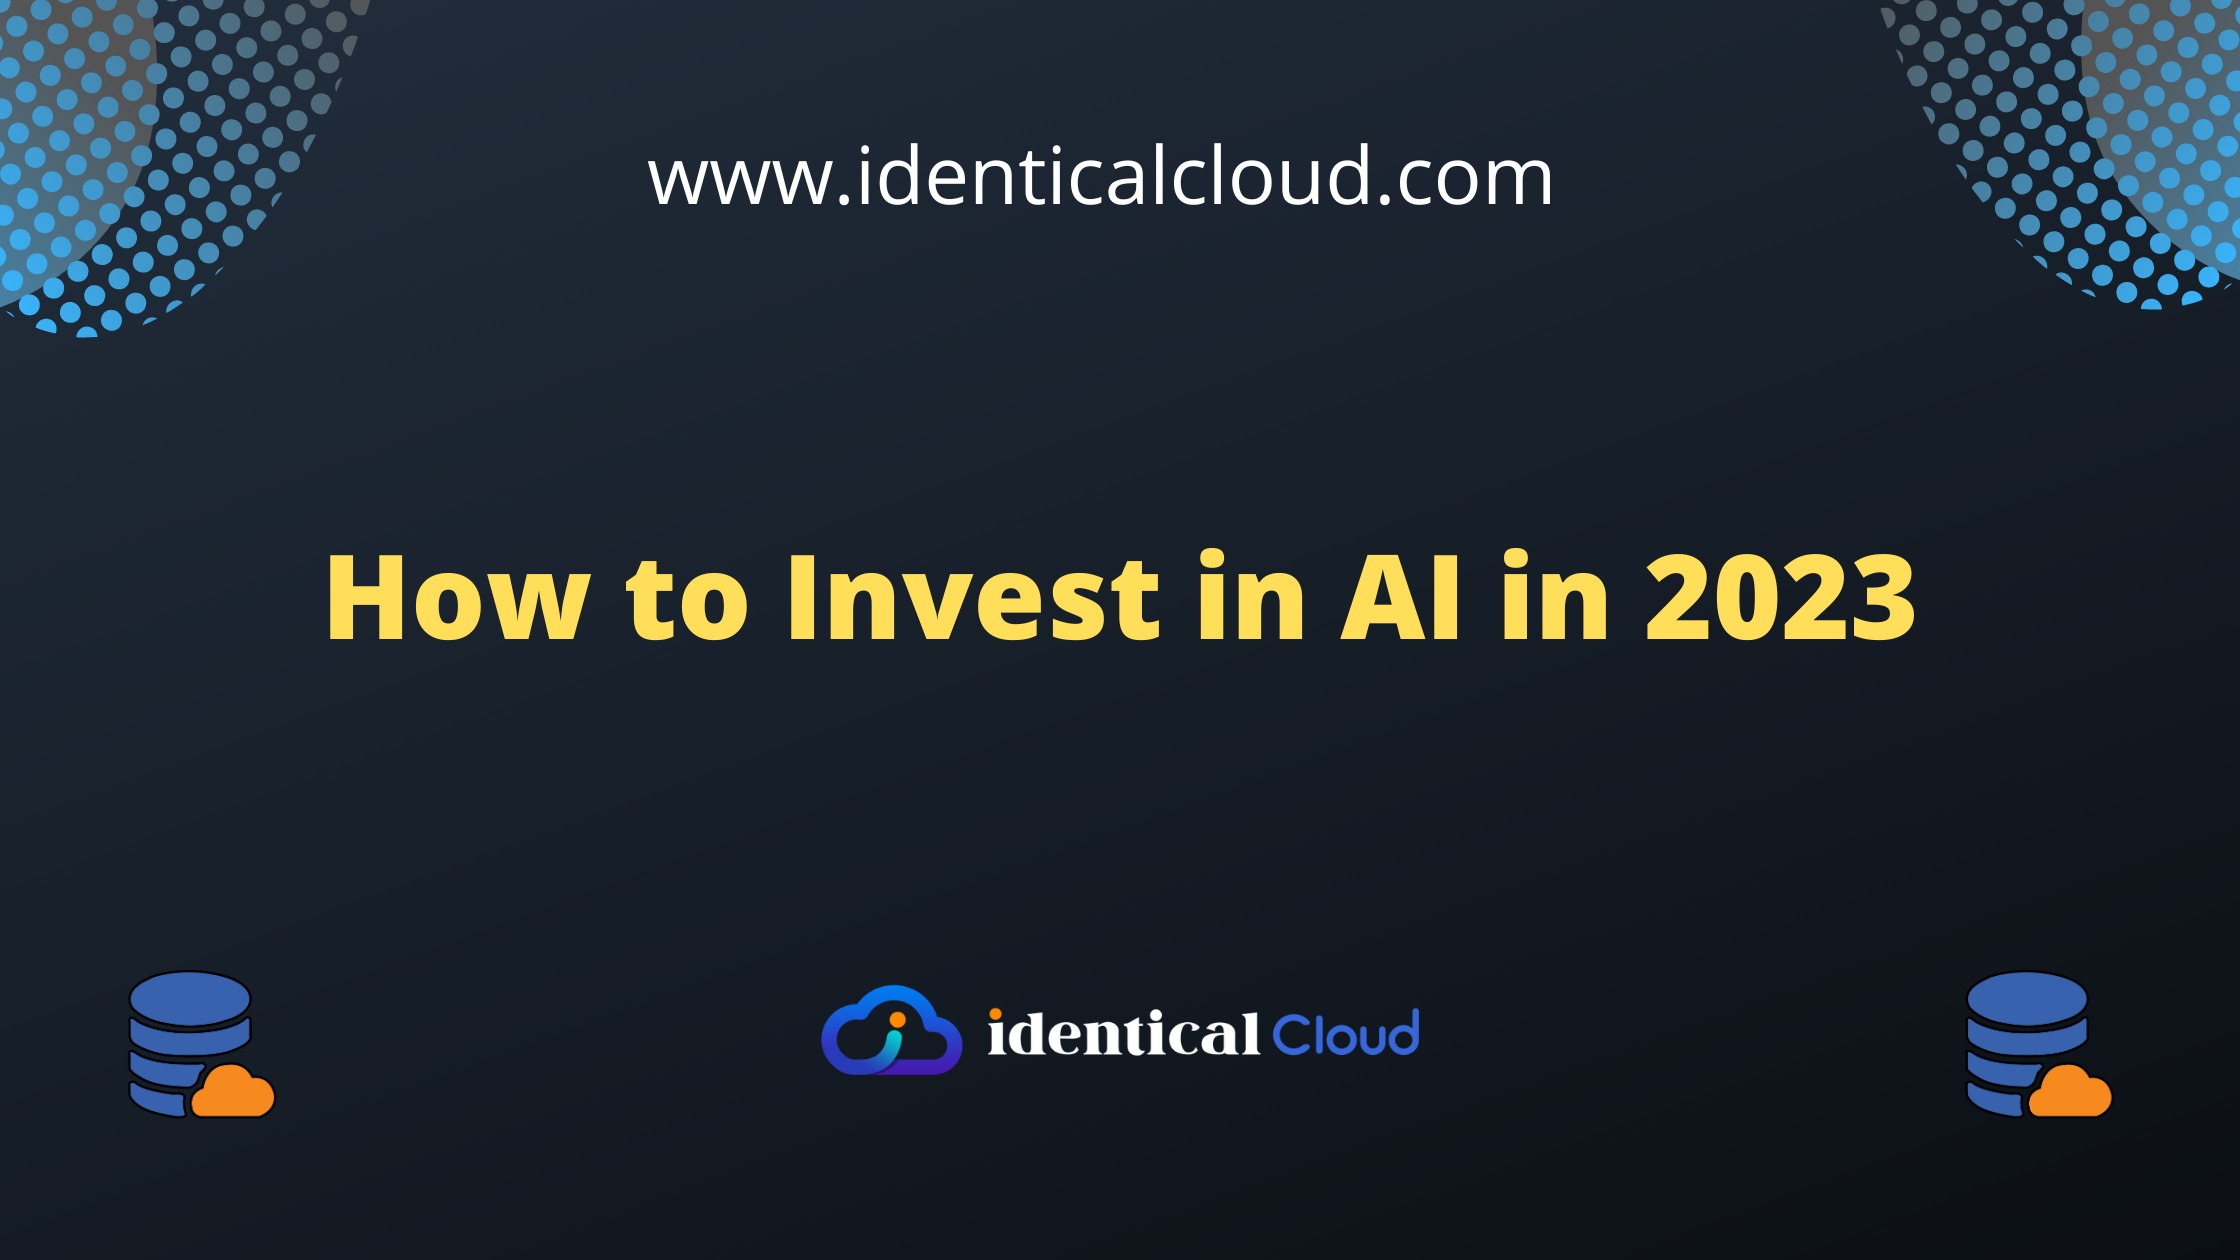 How to Invest in AI in 2023 - identicalcloud.com